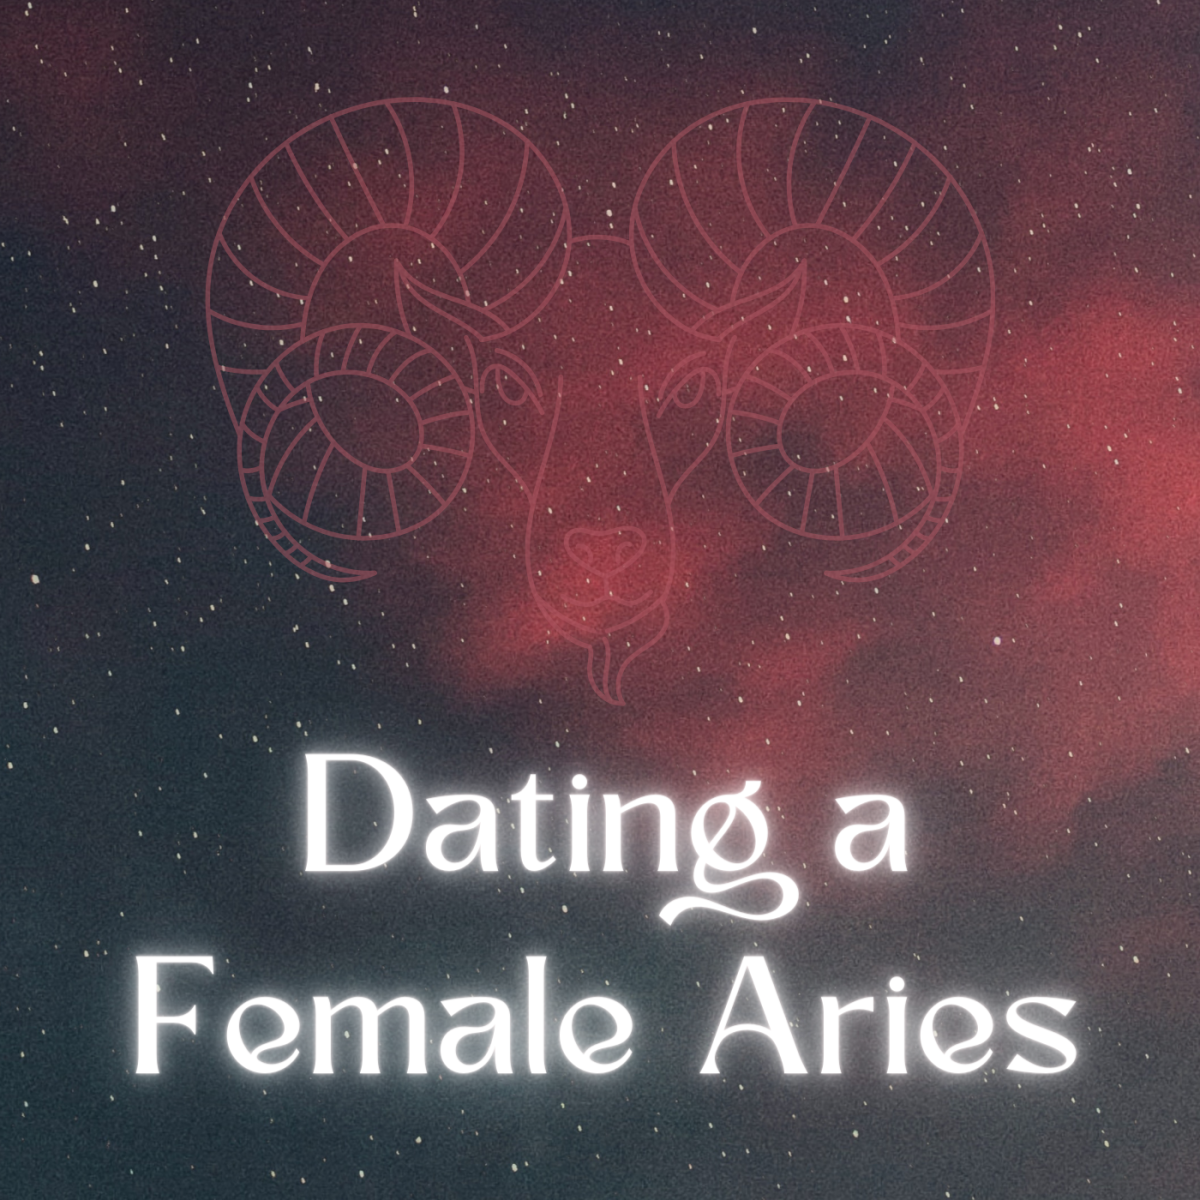 How to date an aries female